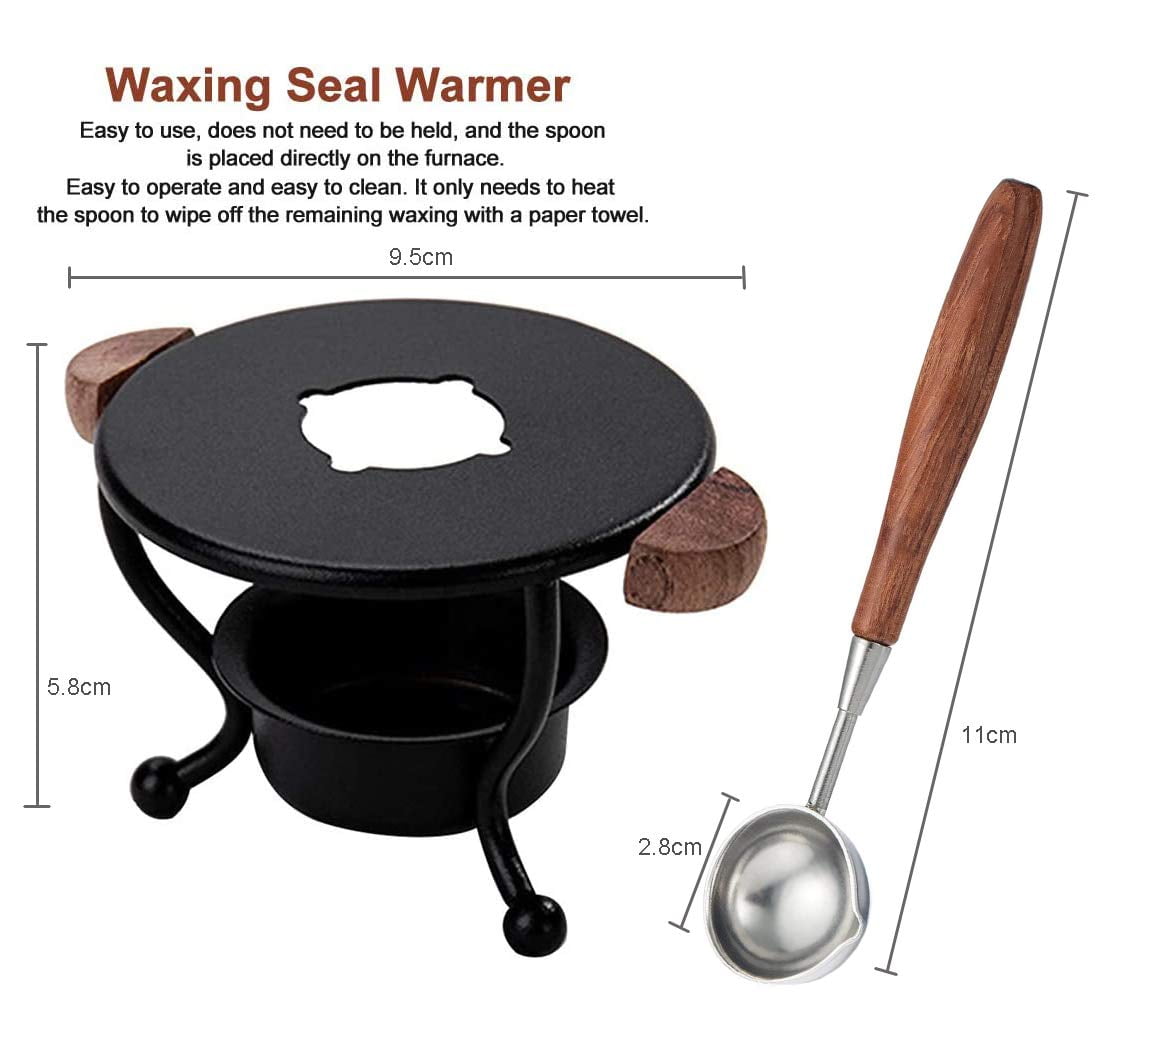 Wax Sealing Kit Melting Furnace Tool Wax Seal Warmer, Wax Seal Stamp Set with Wax Melting Spoon for Melting Wax Seal Beads or Sticks, Wax Stamp Spoon